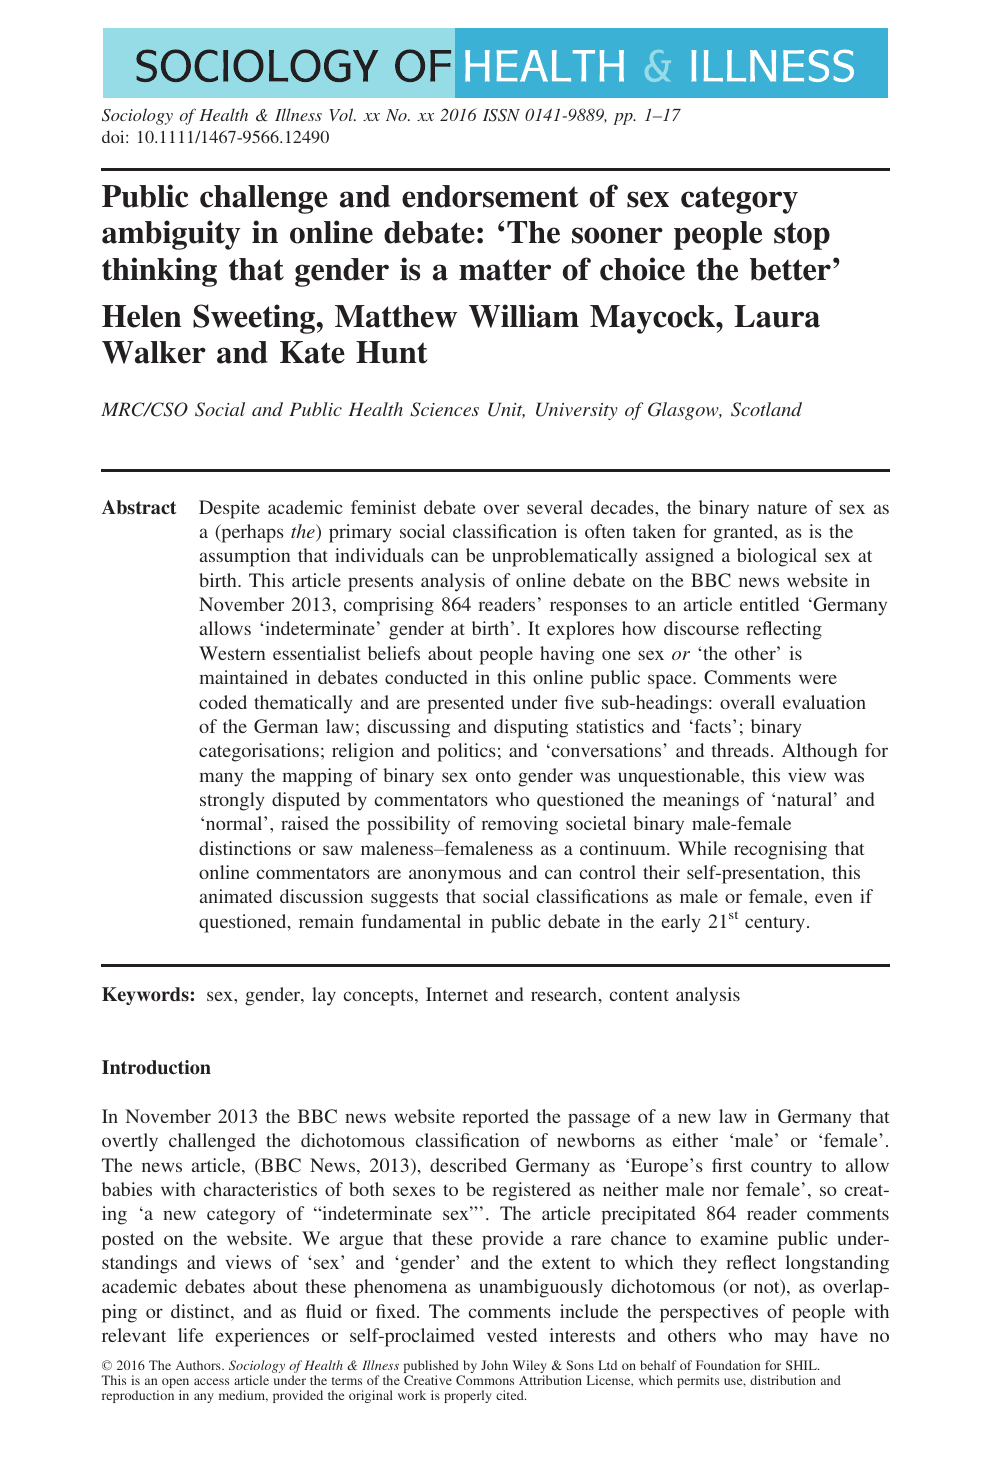 Public challenge and endorsement of sex category ambiguity in online debate The sooner people stop thinking that gender is a matter of choice the better